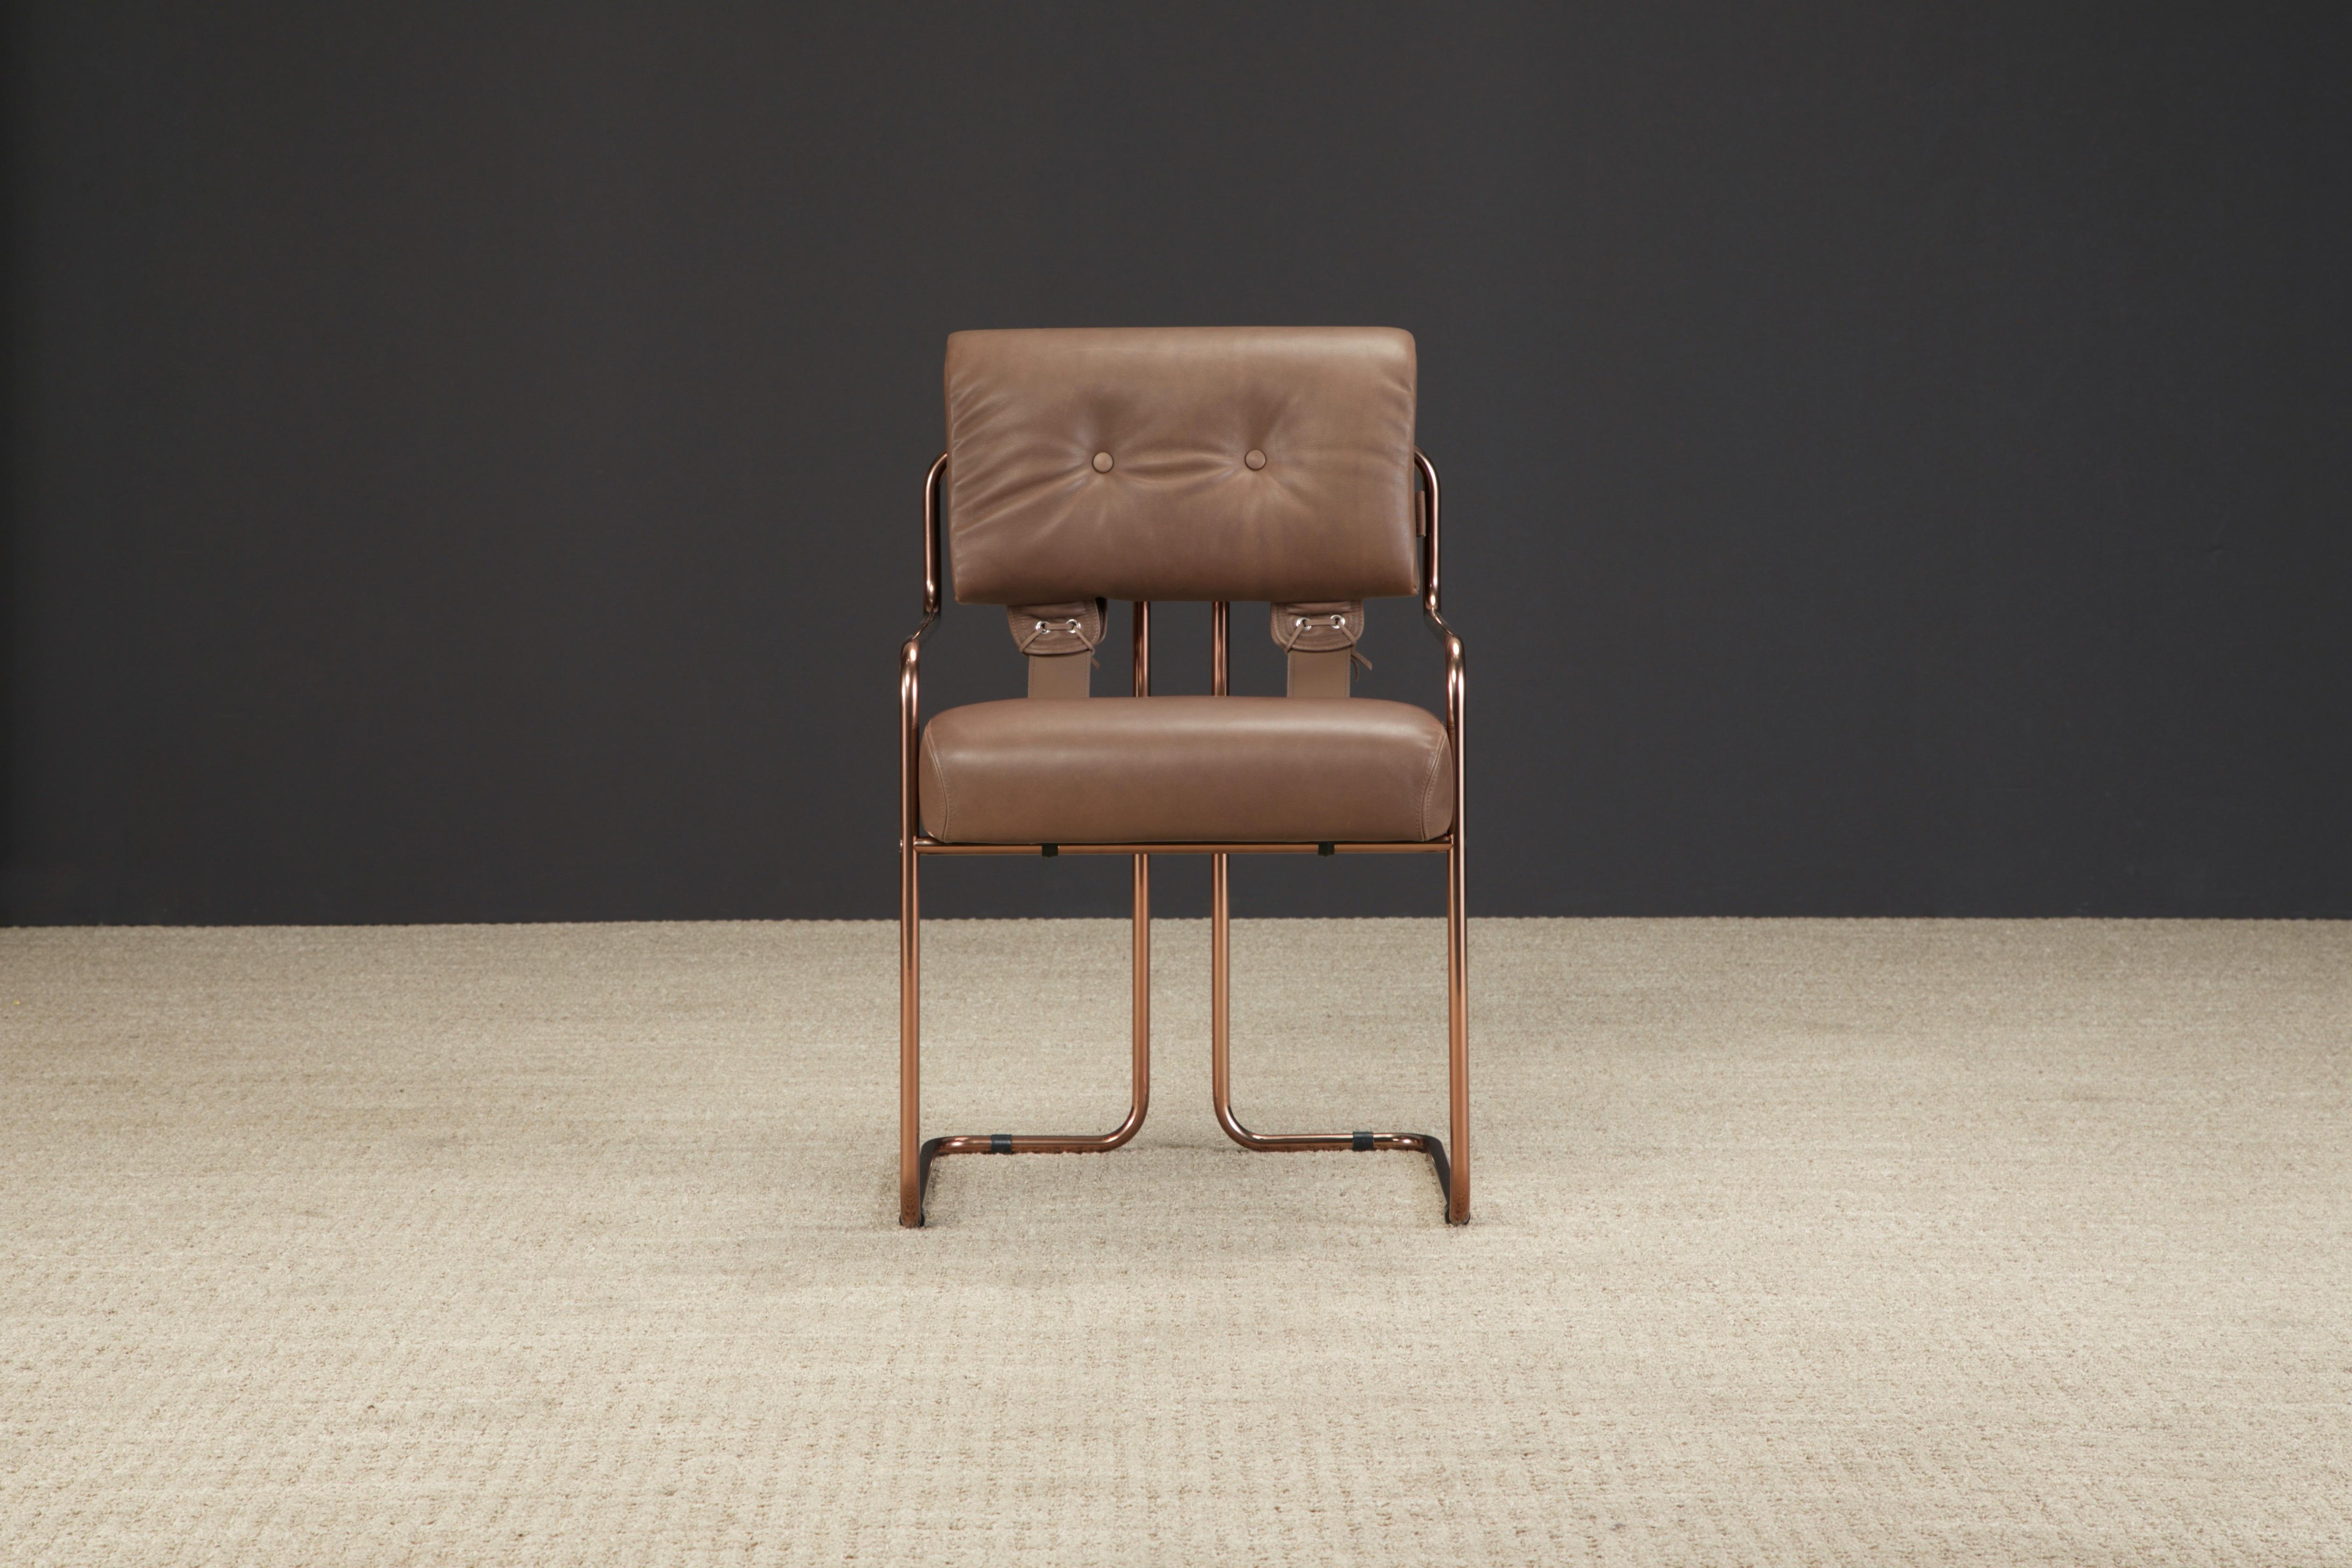 Currently, the most coveted dining chairs by interior designers are 'Tucroma' chairs by Guido Faleschini for i4 Mariani, and we have this incredible special edition Tucroma armchair in soft natural brown leather with polished copper finish frames